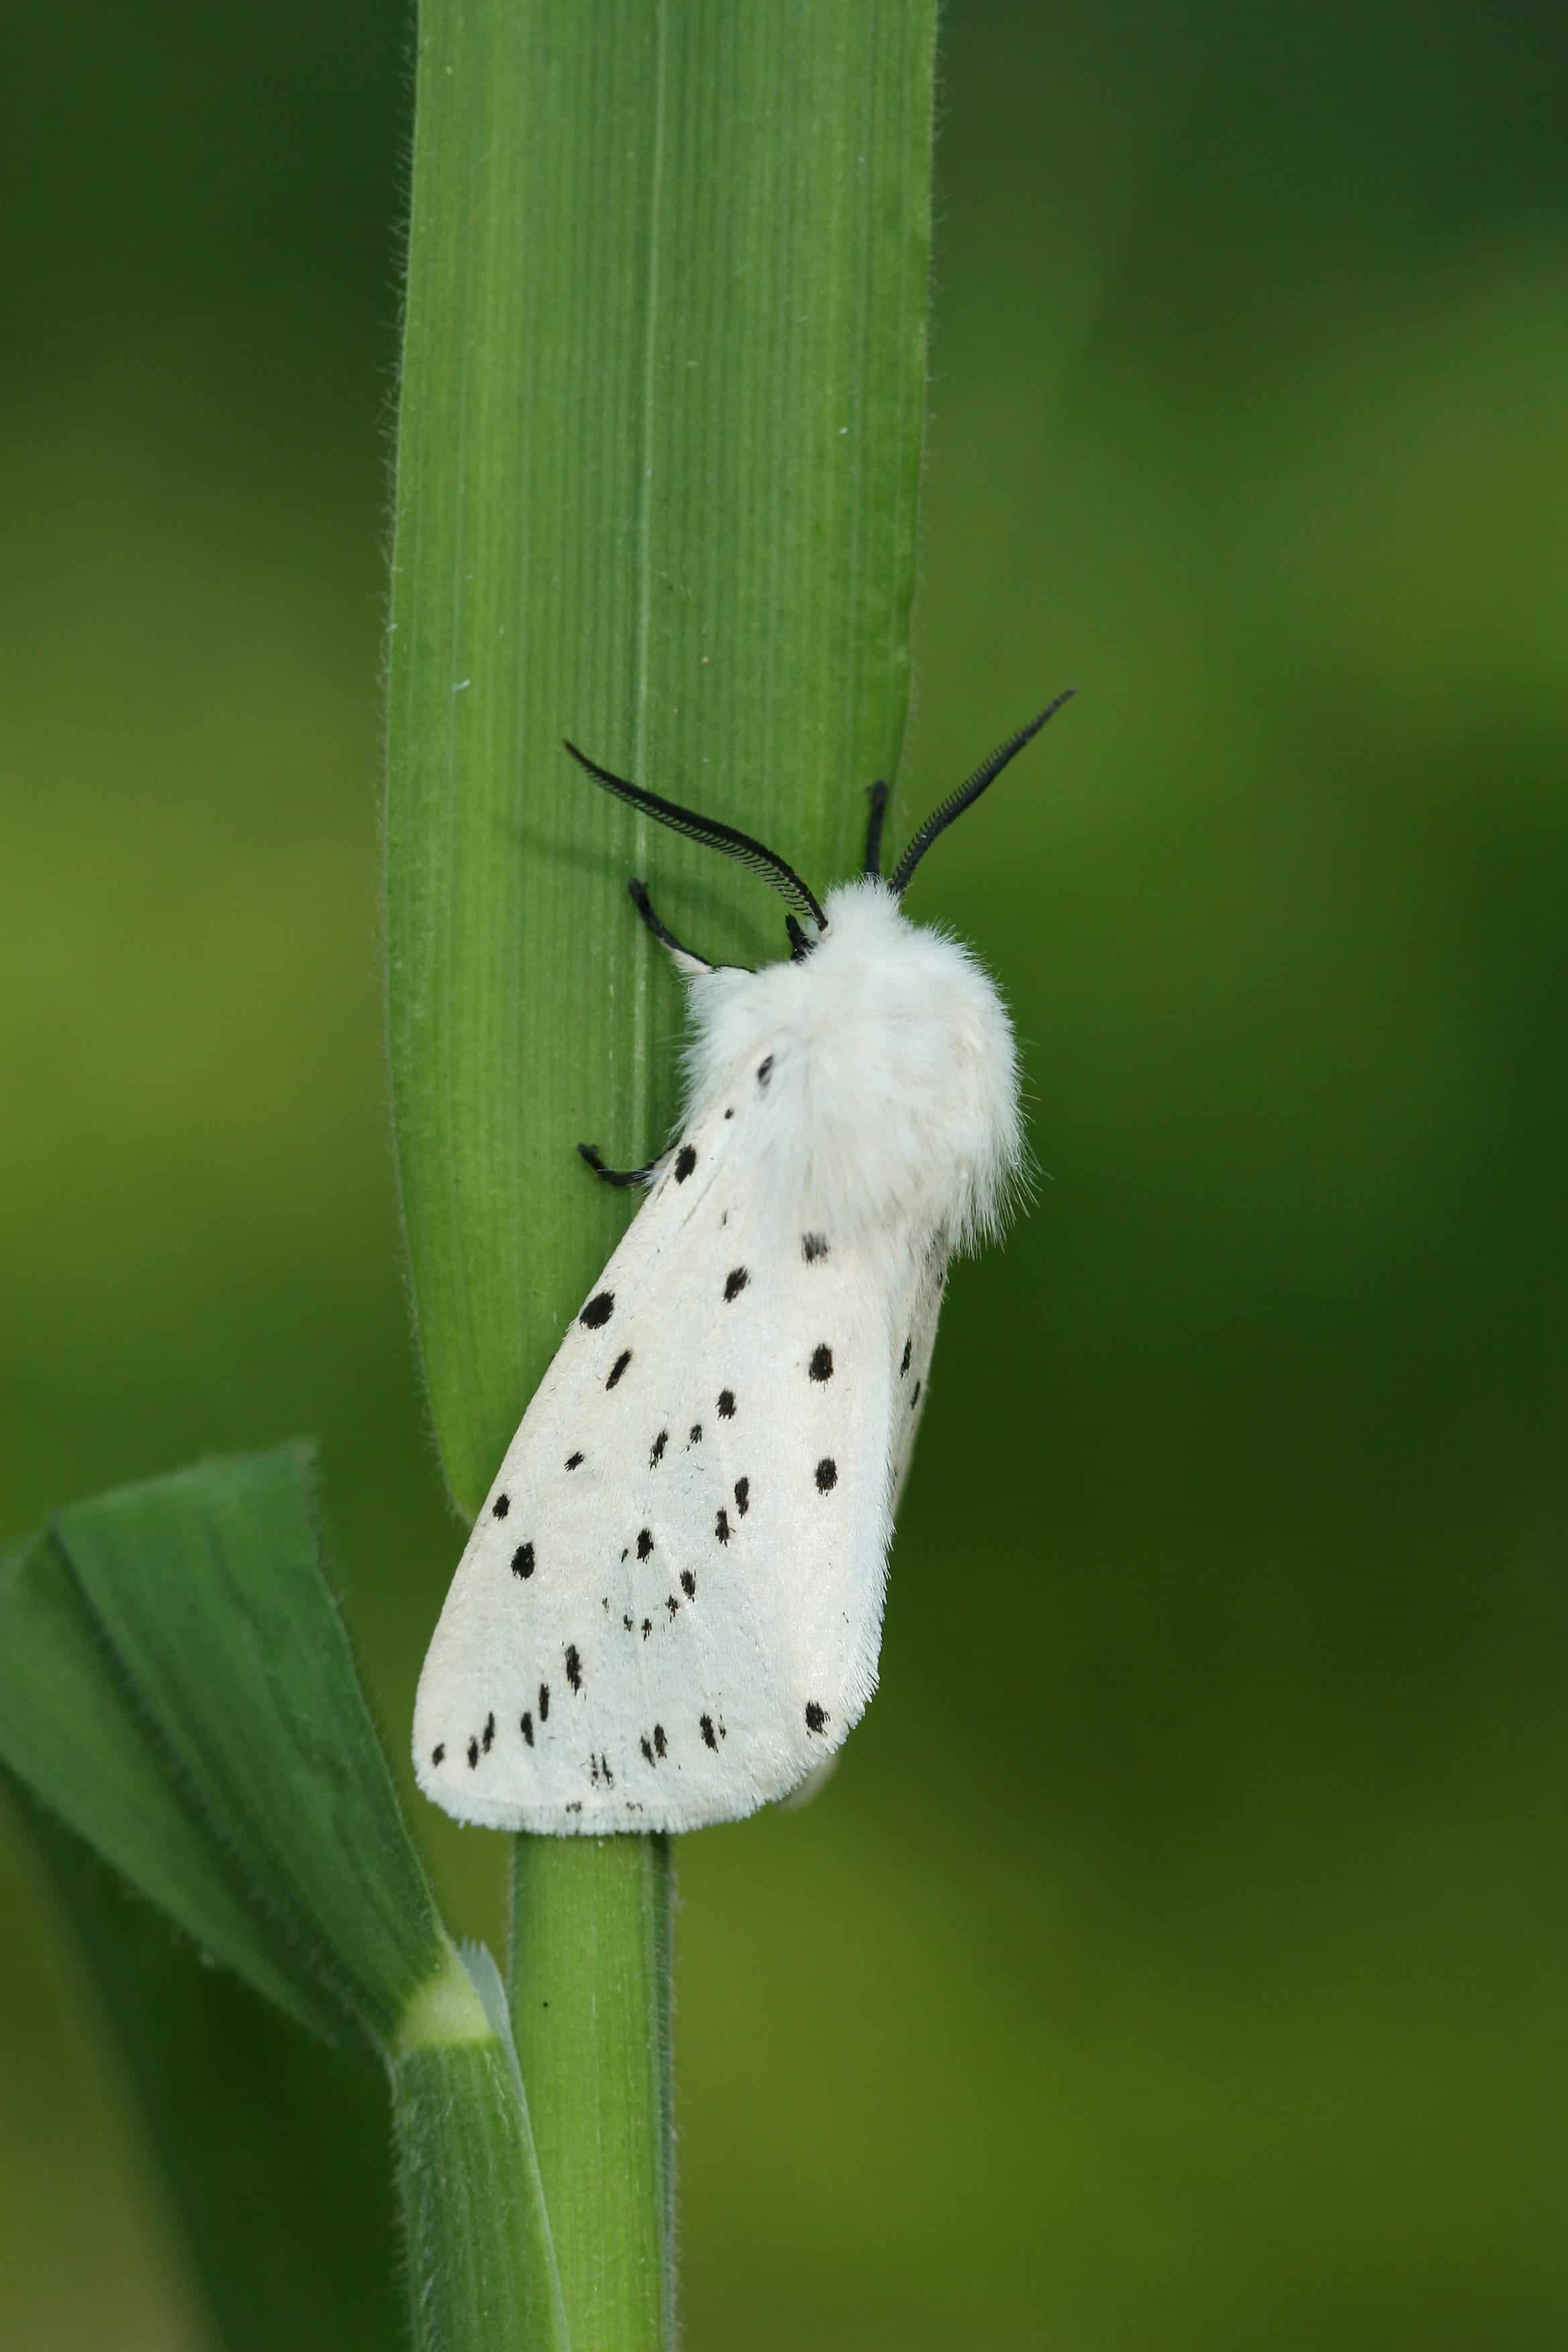 The White ermine Spilosoma lubricipeda; macro-moth communities consist on average of larger, more mobile species in urbanized settings. 
Image credits: Maarten Jacobs.